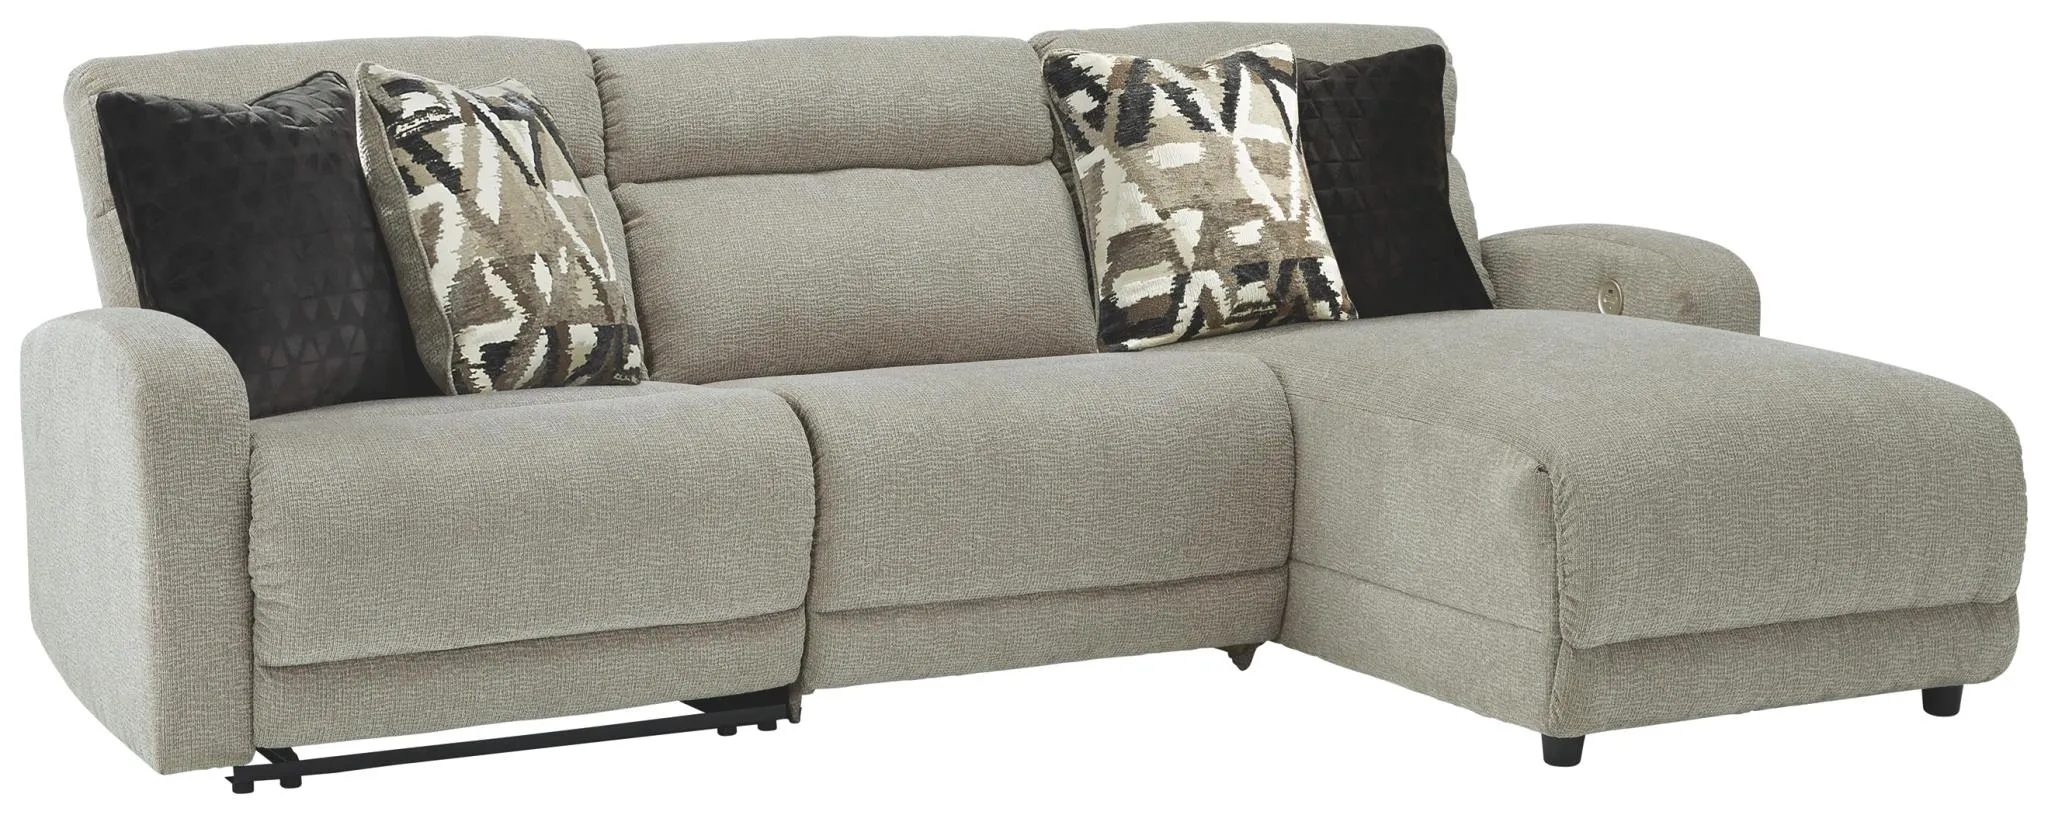 COLLEYVILLE 3-PIECE POWER RECLINING SECTIONAL WITH CHAISE STONE SIGNATURE DESIGN